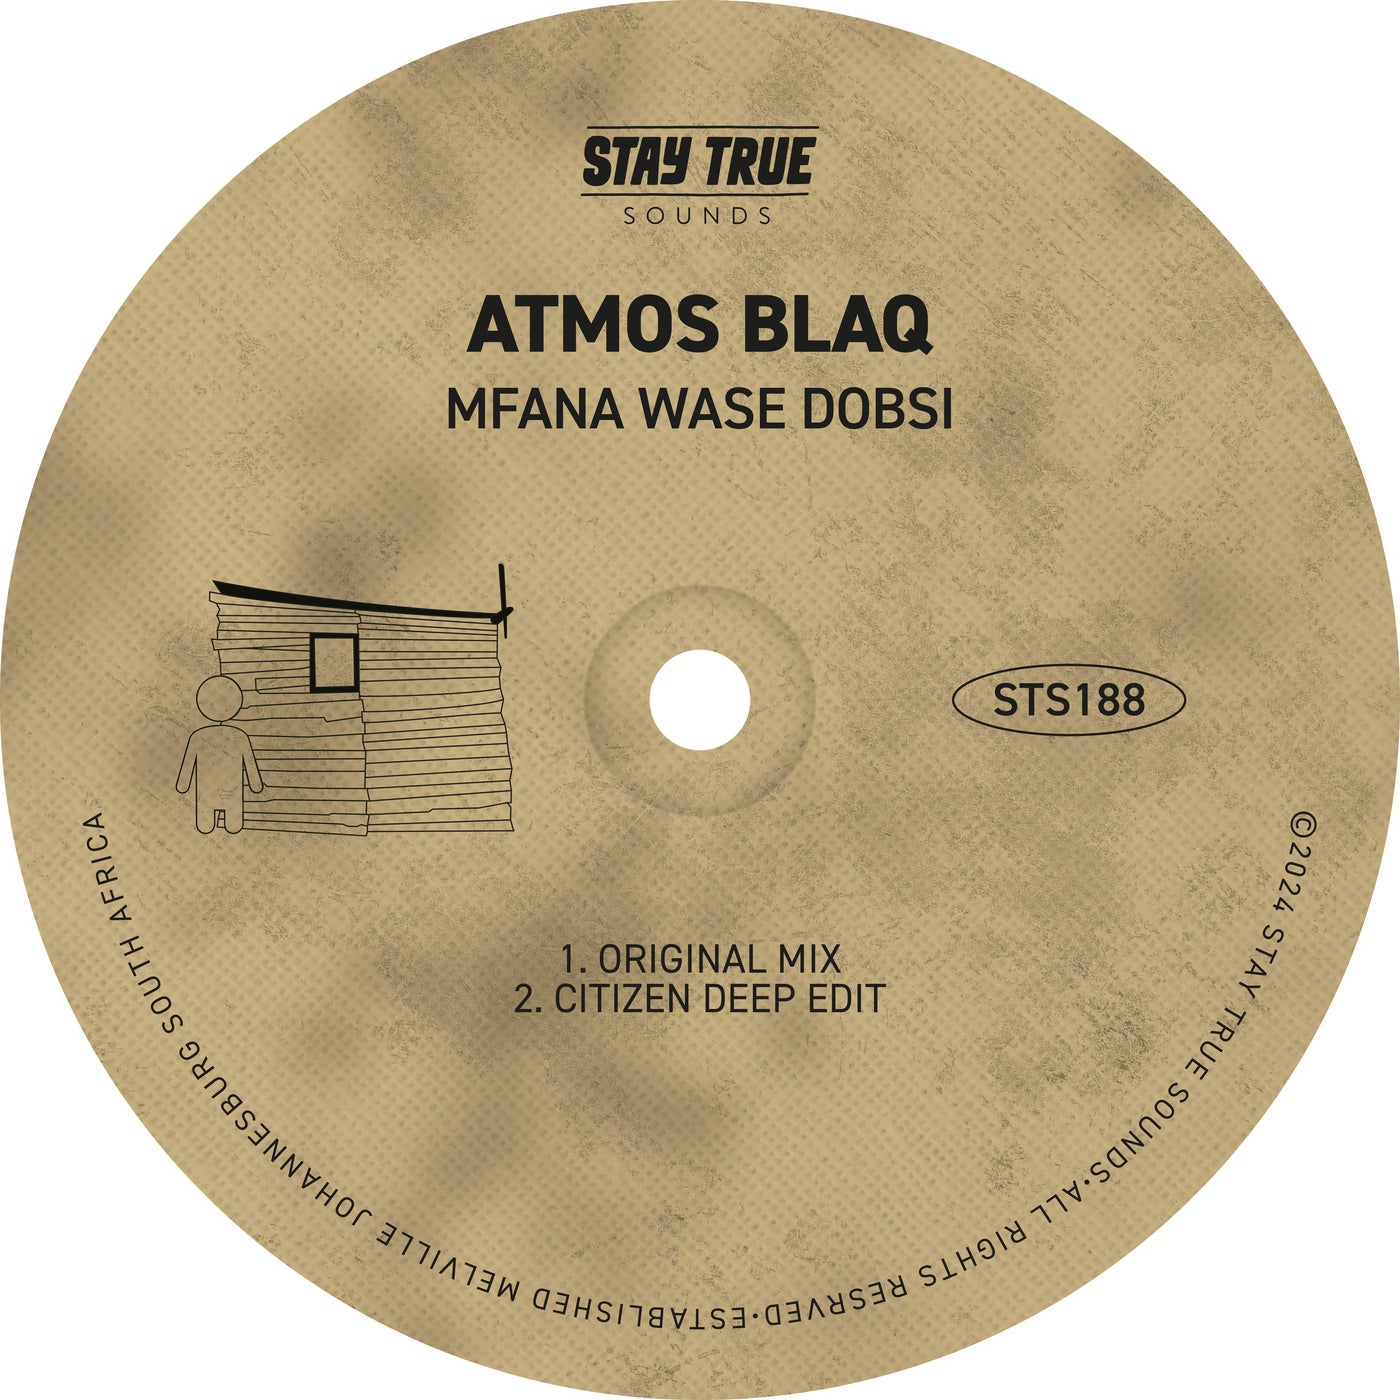 image cover: Atmos Blaq - Mfana Wase Dobsi on Stay True Sounds